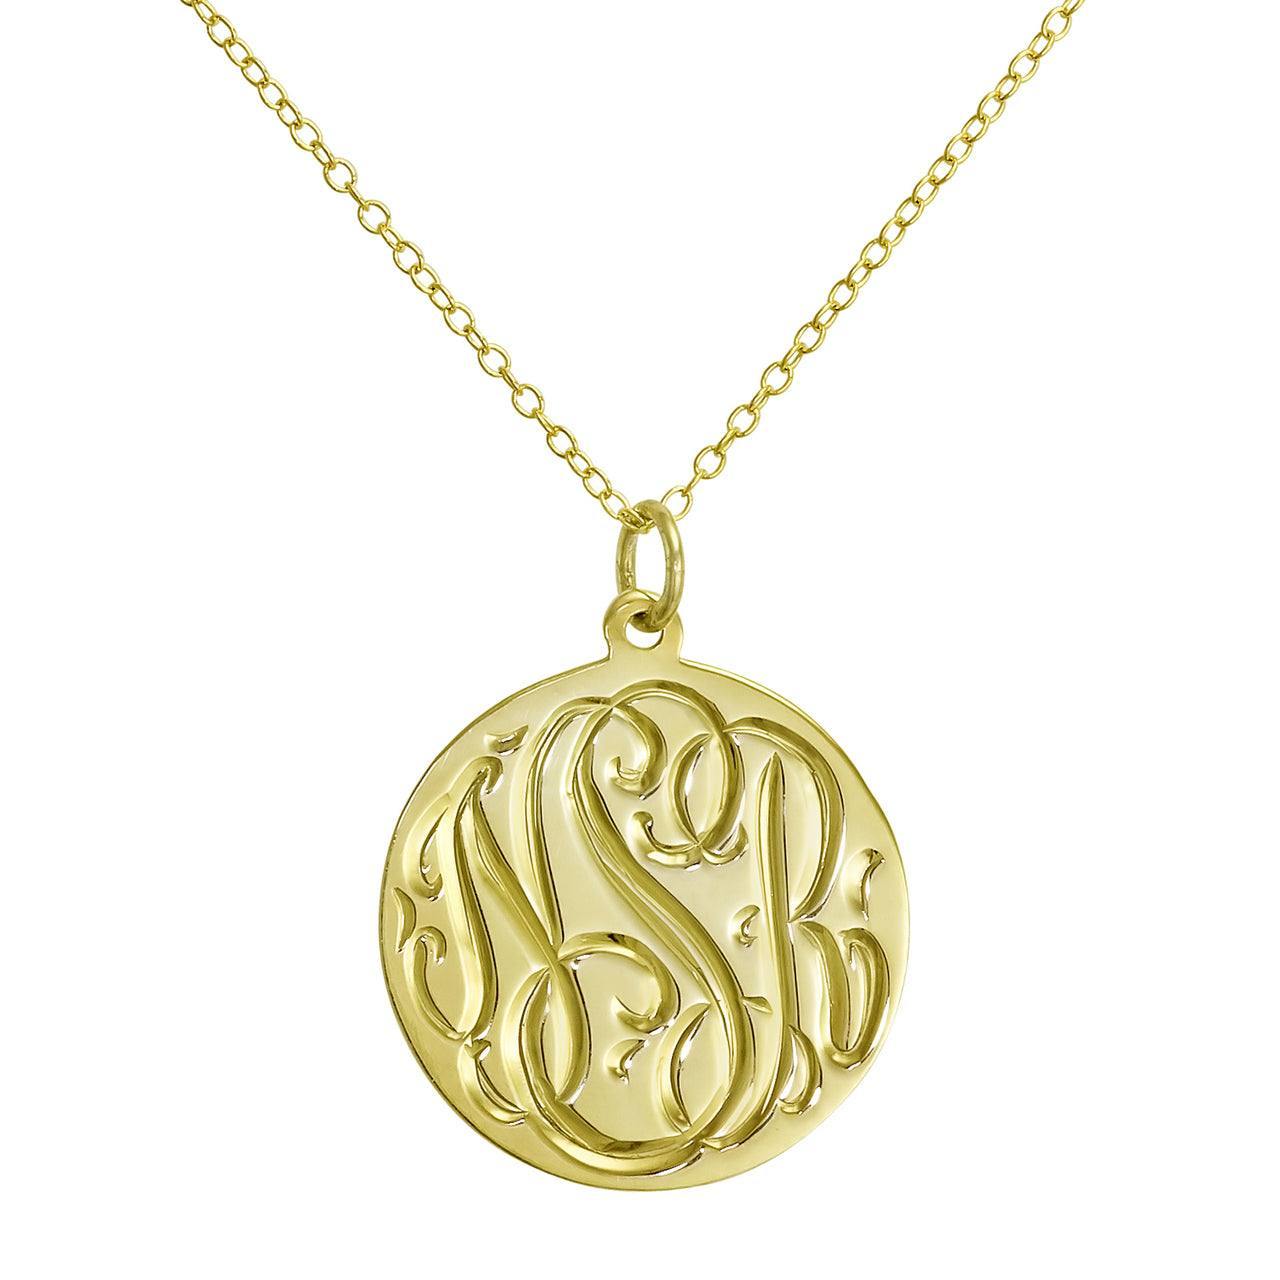 1/2 inch, Engravable 14K Gold Disc Charm Necklace with Link Chain - Small